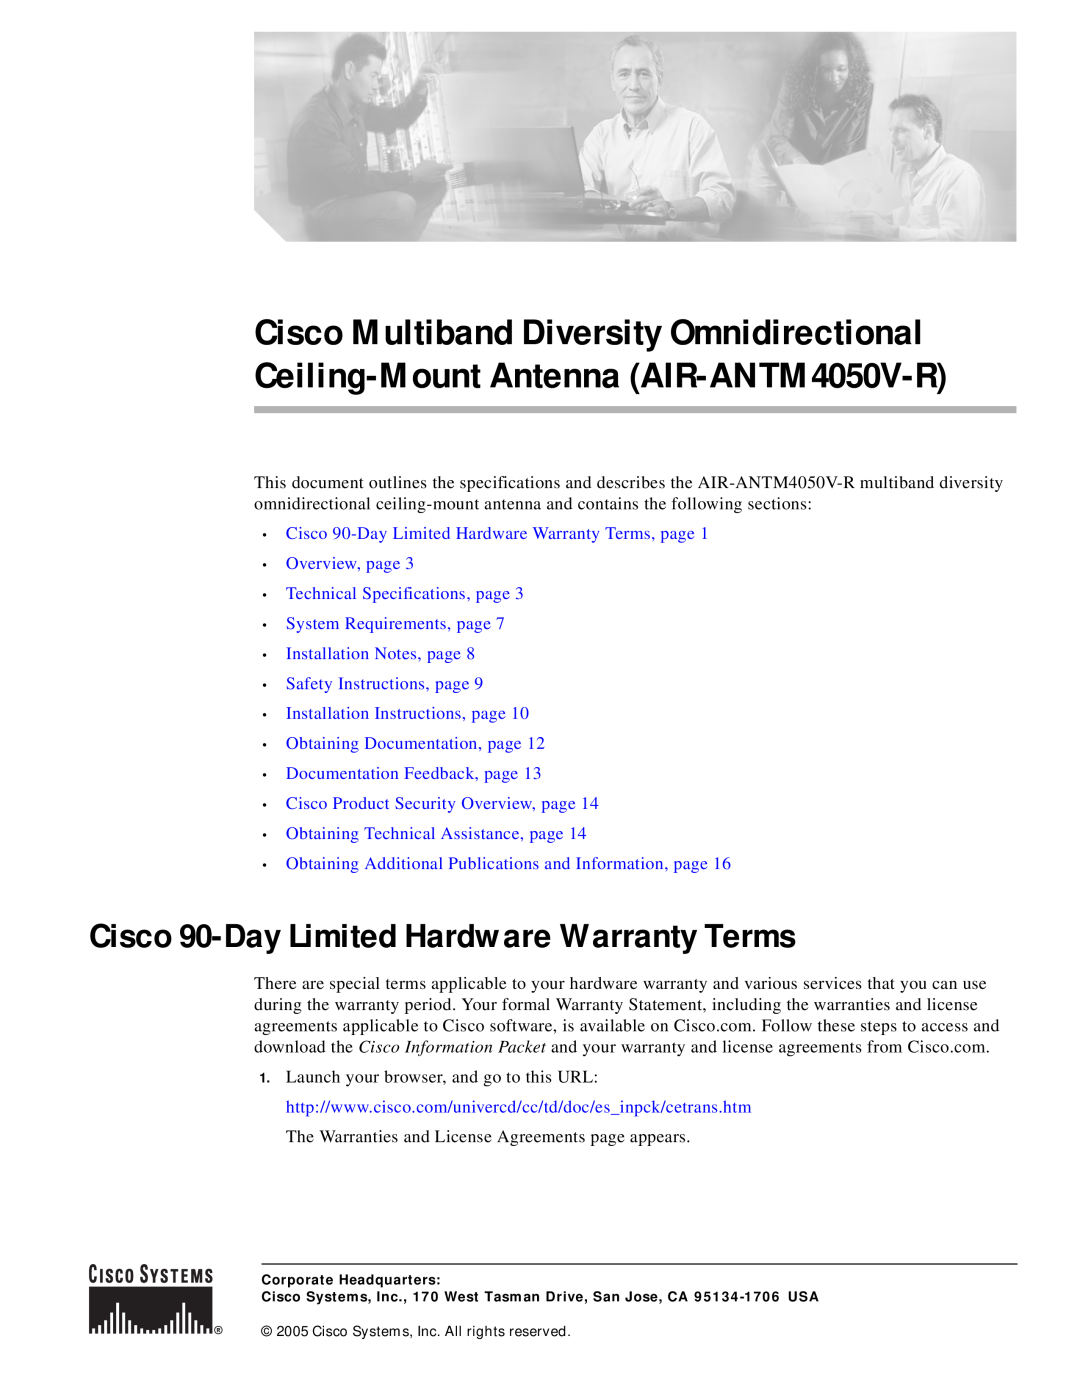 Cisco Systems AIR-ANTM4050V-R warranty Cisco 90-DayLimited Hardware Warranty Terms, •System Requirements, page 